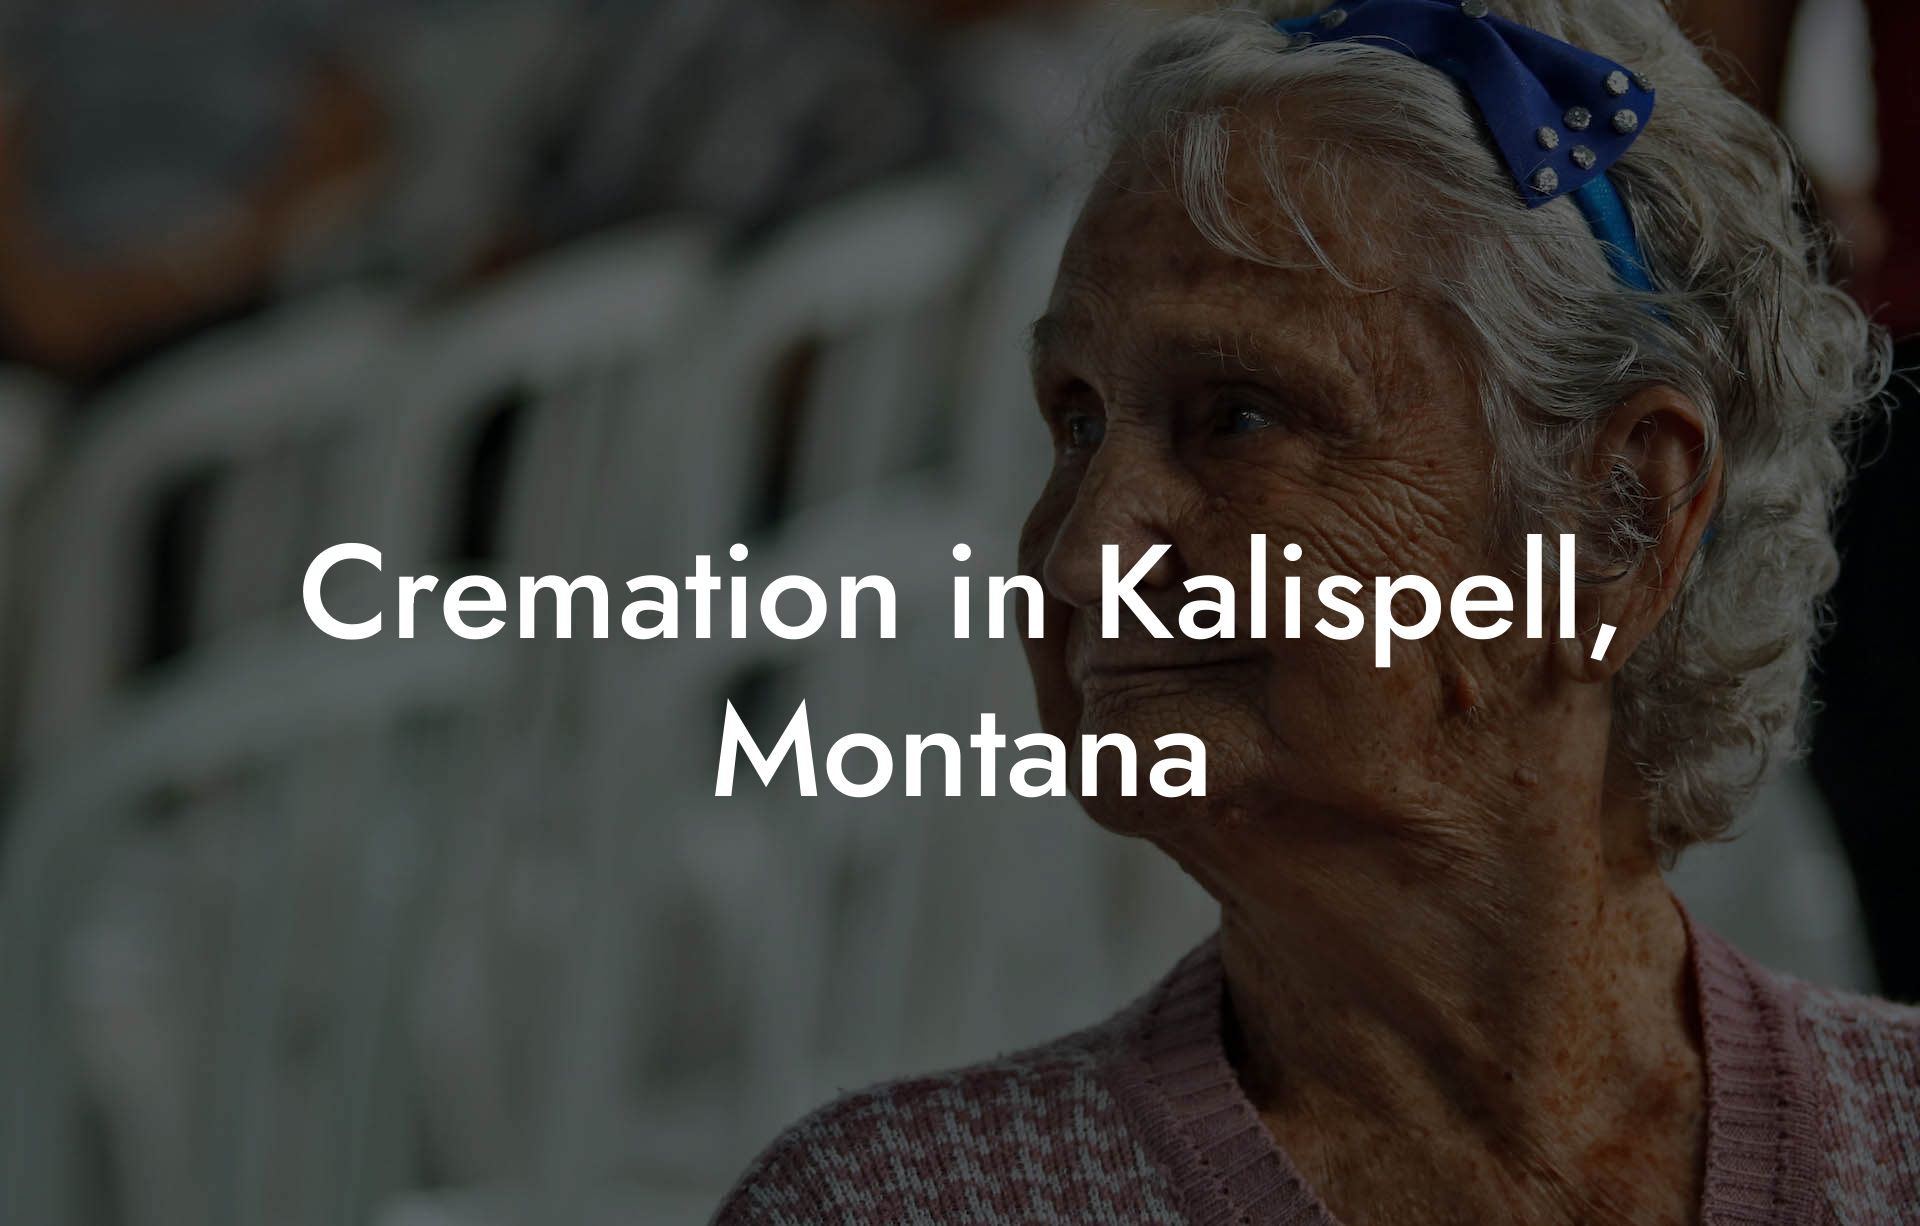 Cremation in Kalispell, Montana